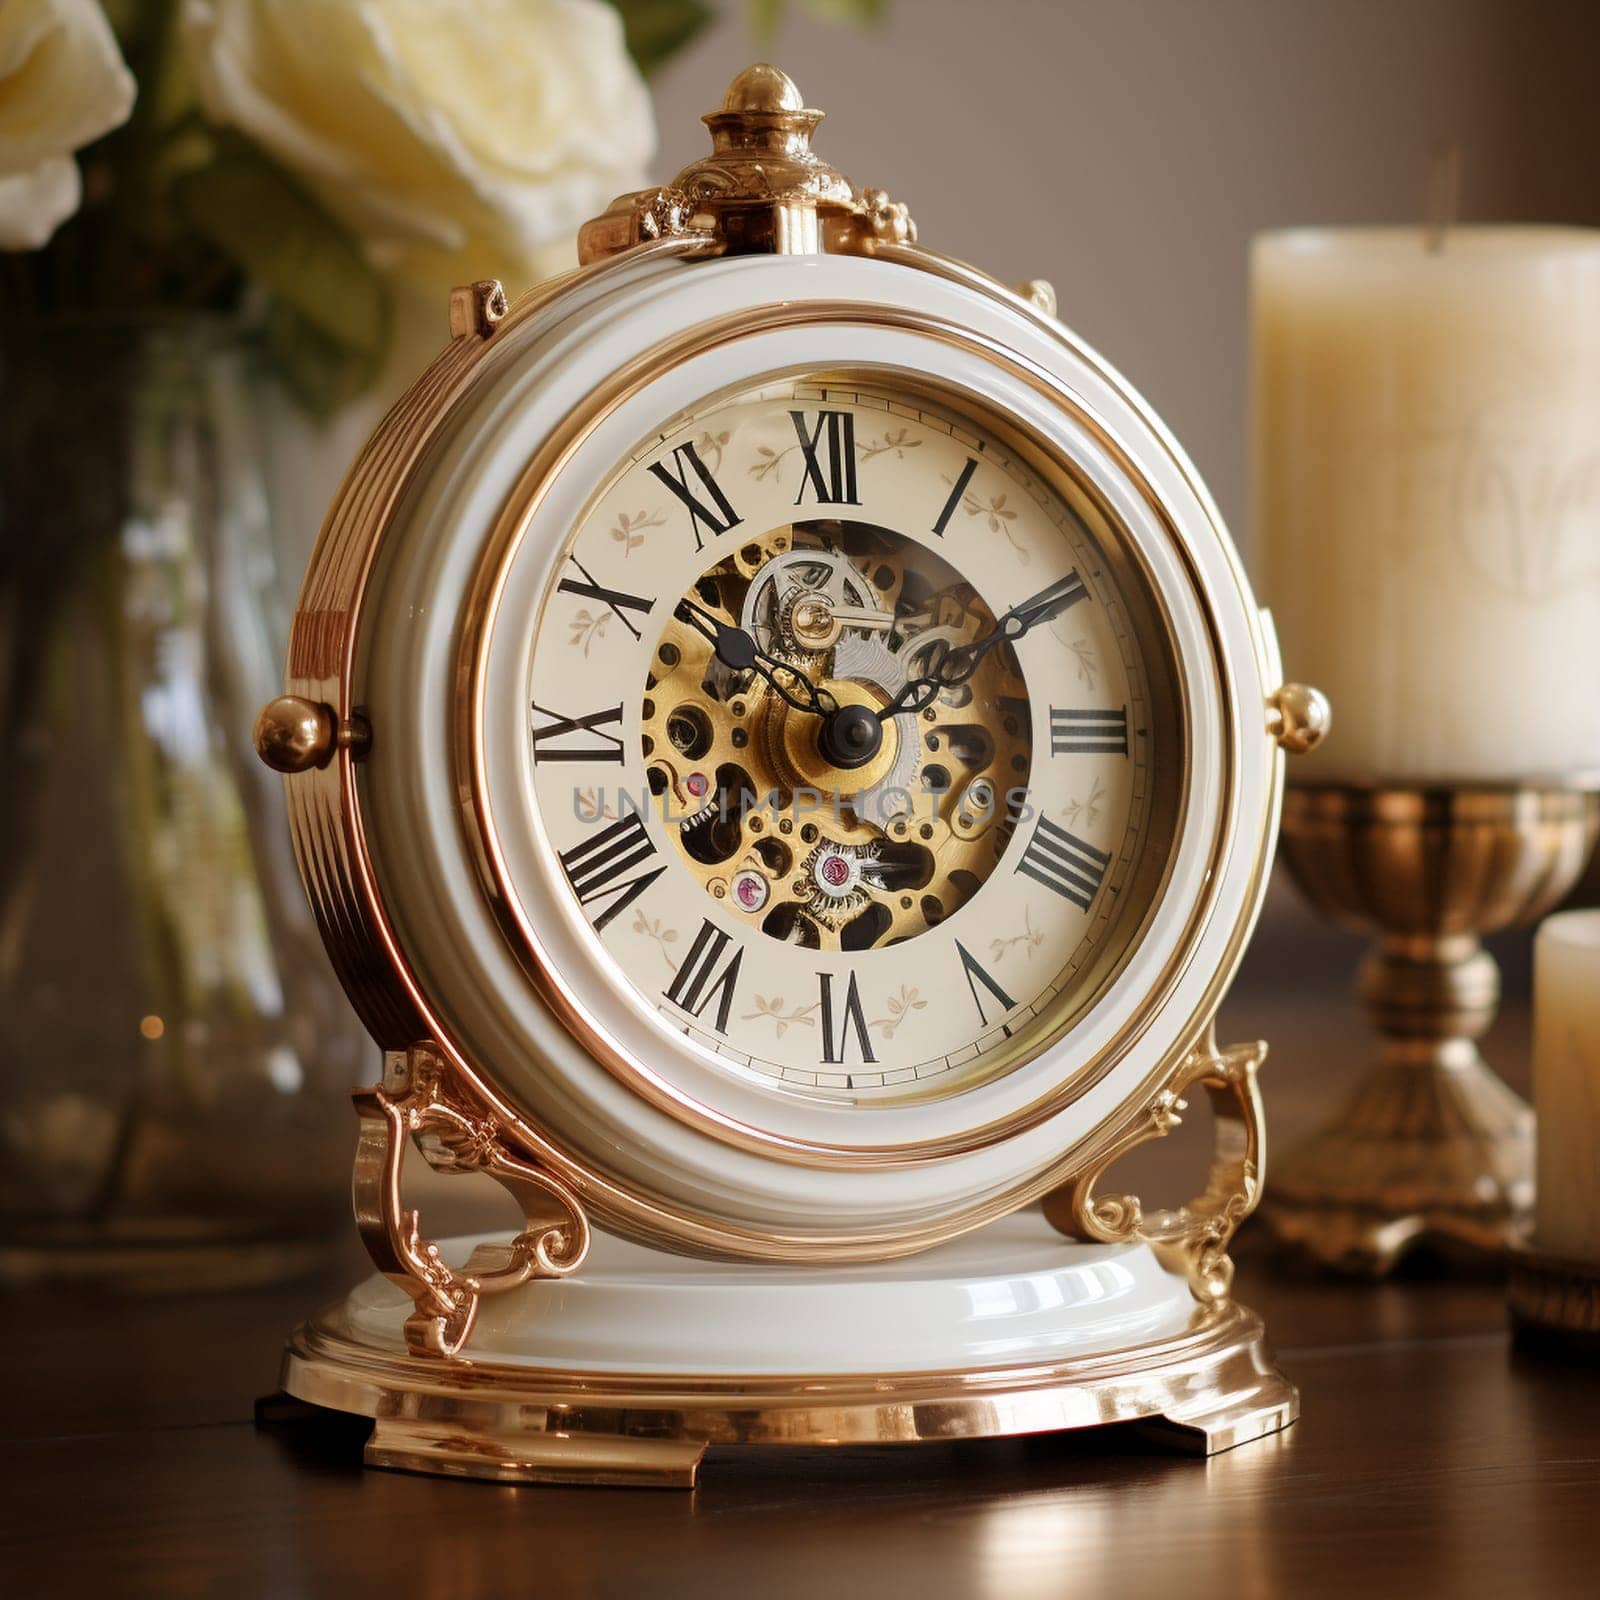 Get lost in the allure of time with this image depicting an elegant, vintage clock with intricate details and a mesmerizing mechanism. The focus of the image is on the delicate hands of the clock, showcasing their intricate movements and the artistry that went into their design. The clock is set in a beautifully ornate setting, evoking a sense of nostalgia and transporting viewers back to a bygone era. This image strikes a perfect balance between artistic aesthetics and functional precision, captivating viewers with the timeless beauty of vintage clocks' craftsmanship.